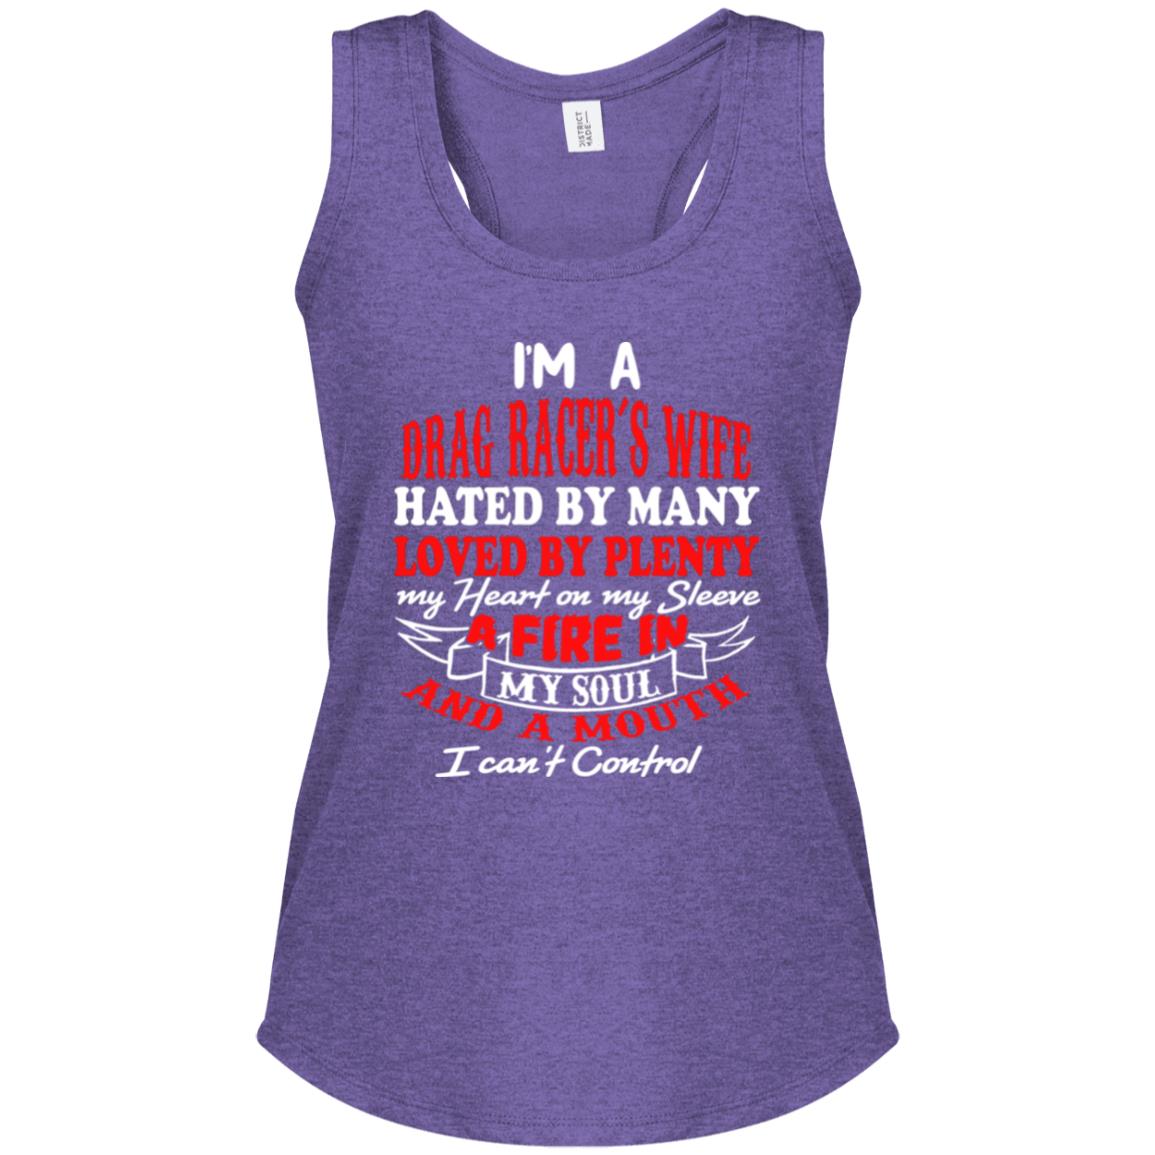 I'm A Drag Racer's Wife Hated By Many Loved By Plenty Women's Perfect Tri Racerback Tank